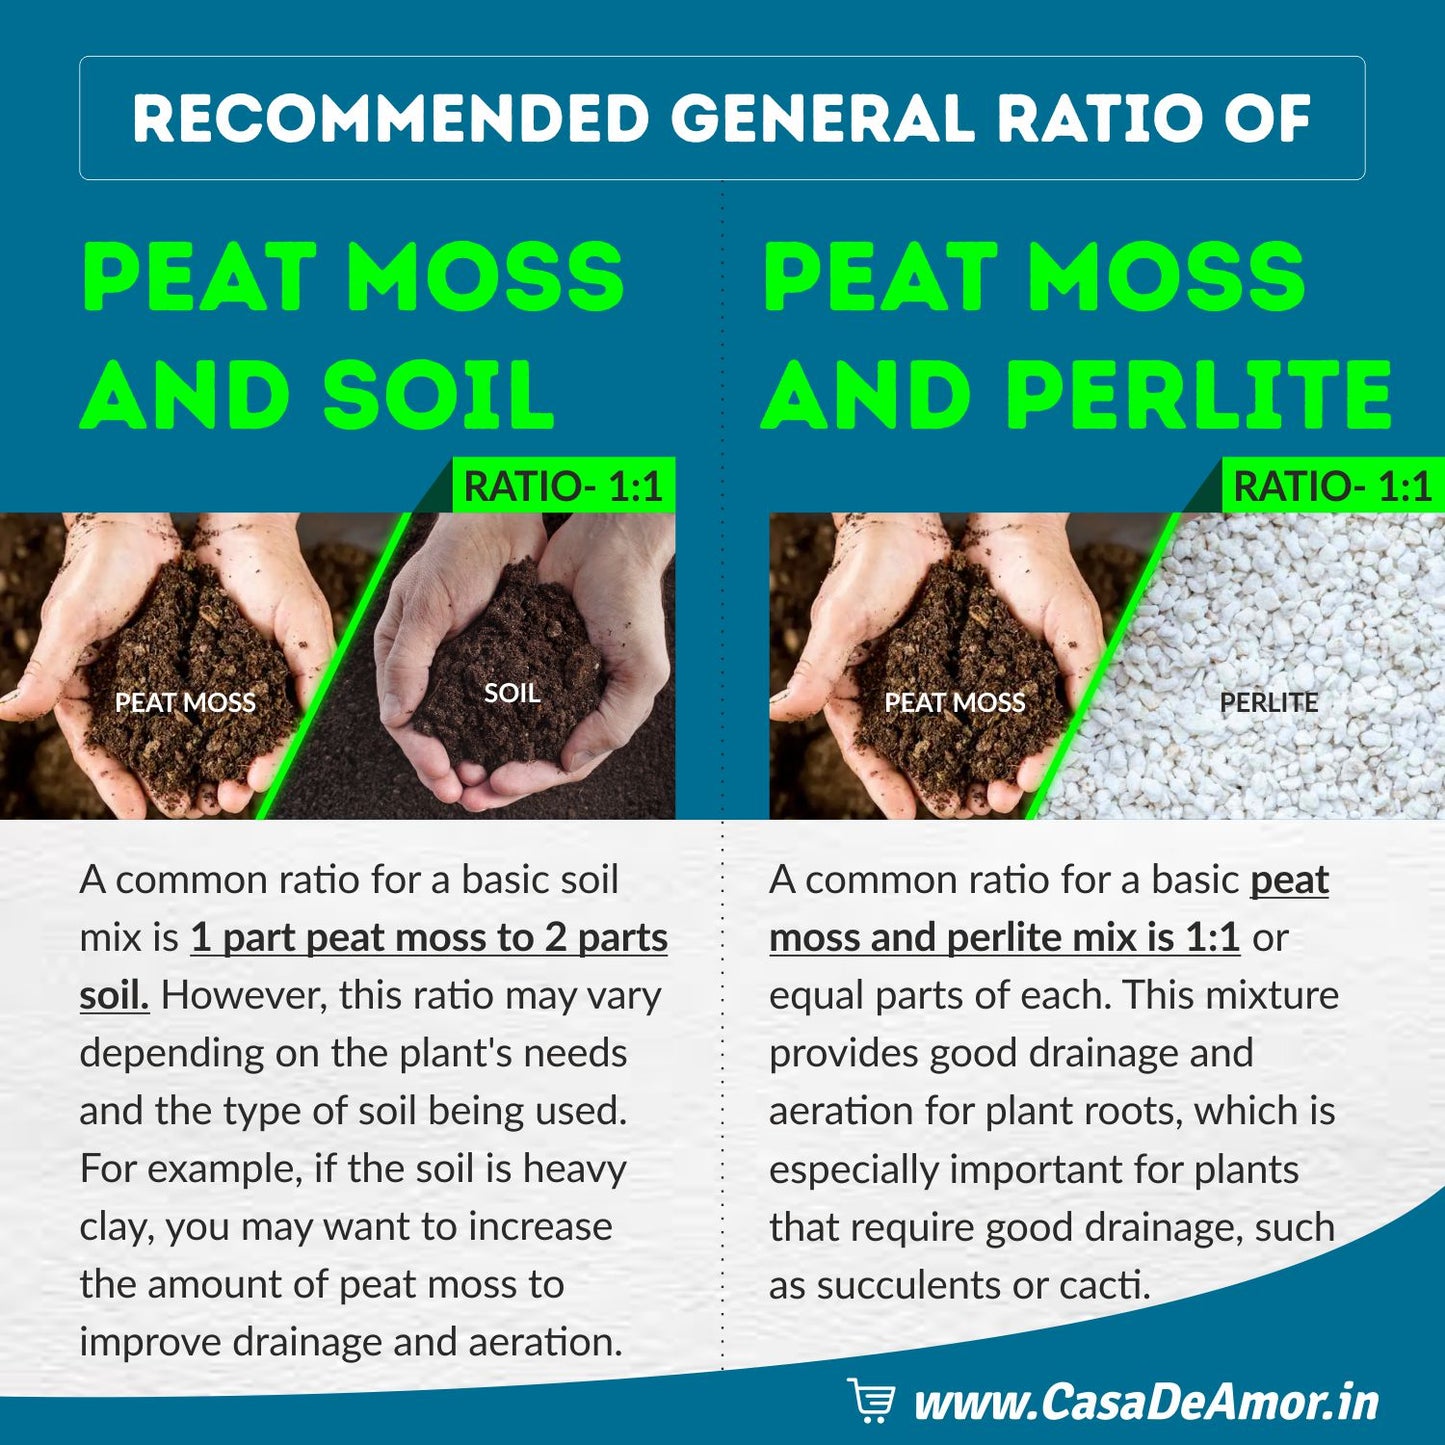 Casa De Amor Peat Moss Organic and Natural, for Potting Mix, Seed Starting and Improving Native Soil, Organic Gardening